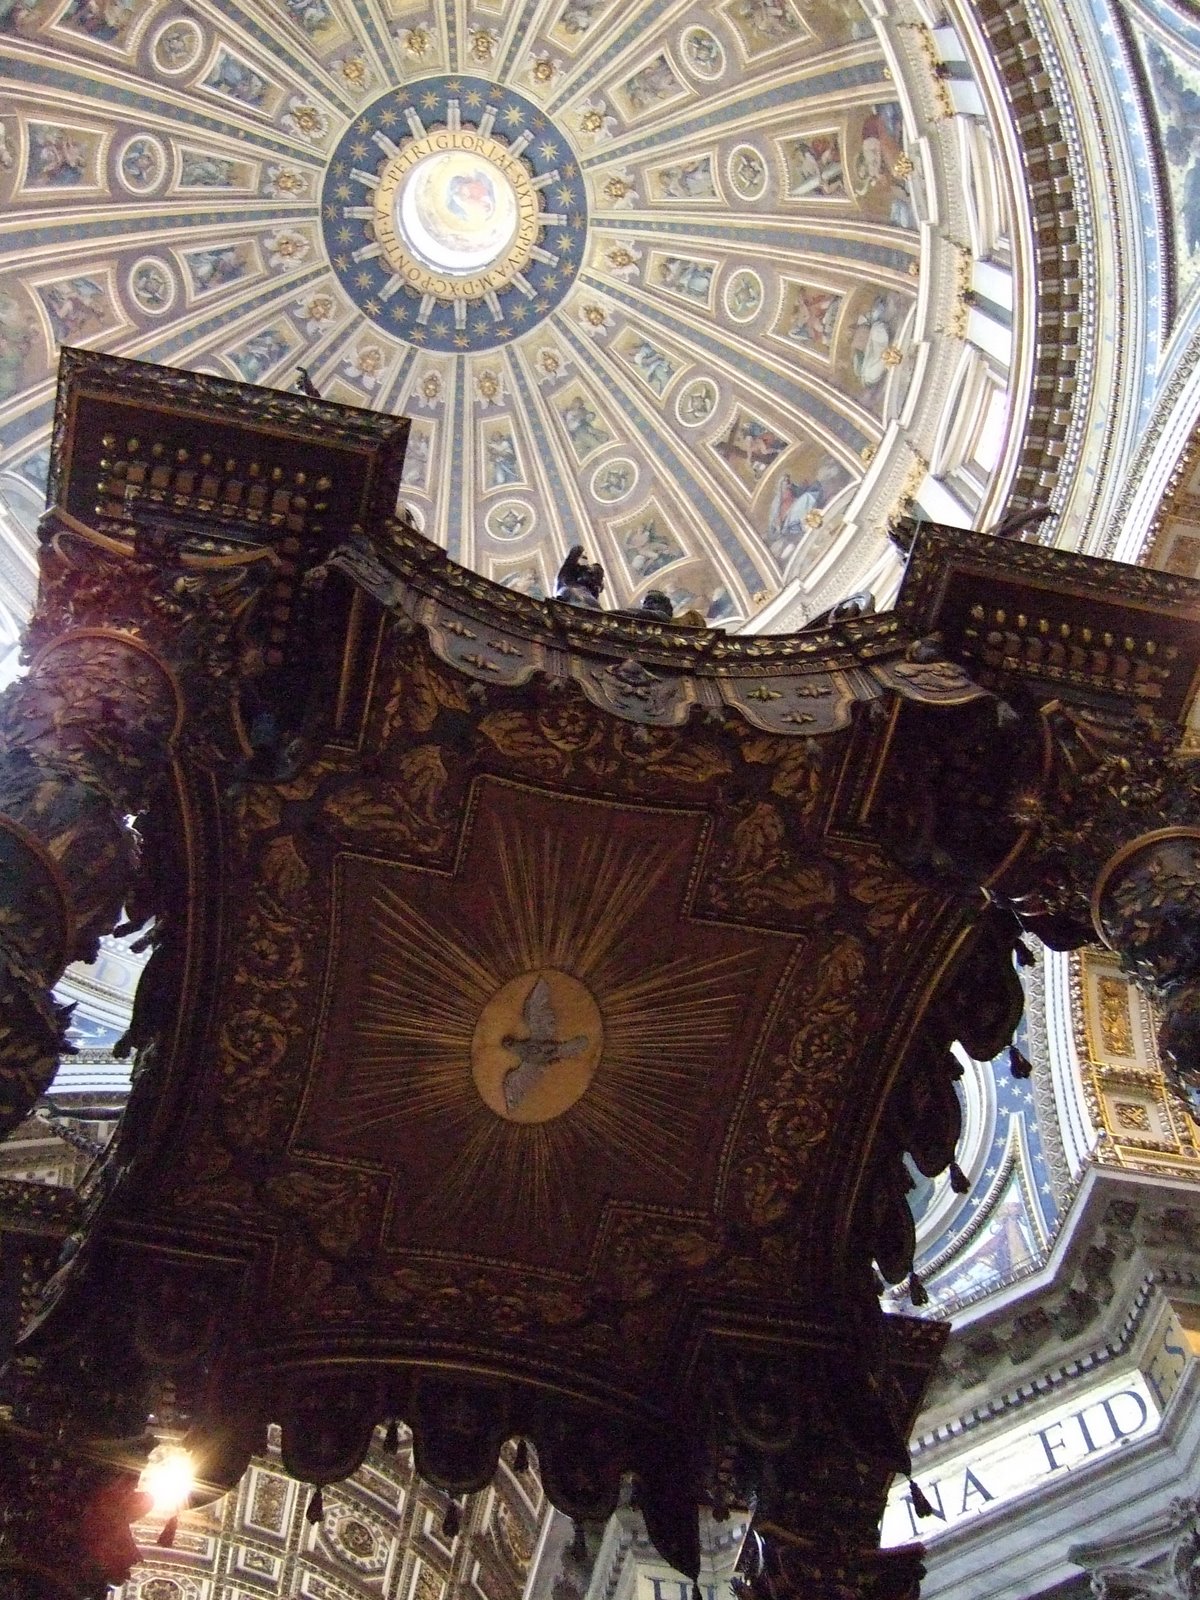 [St+Peter--Dome+above+tomb.JPG]